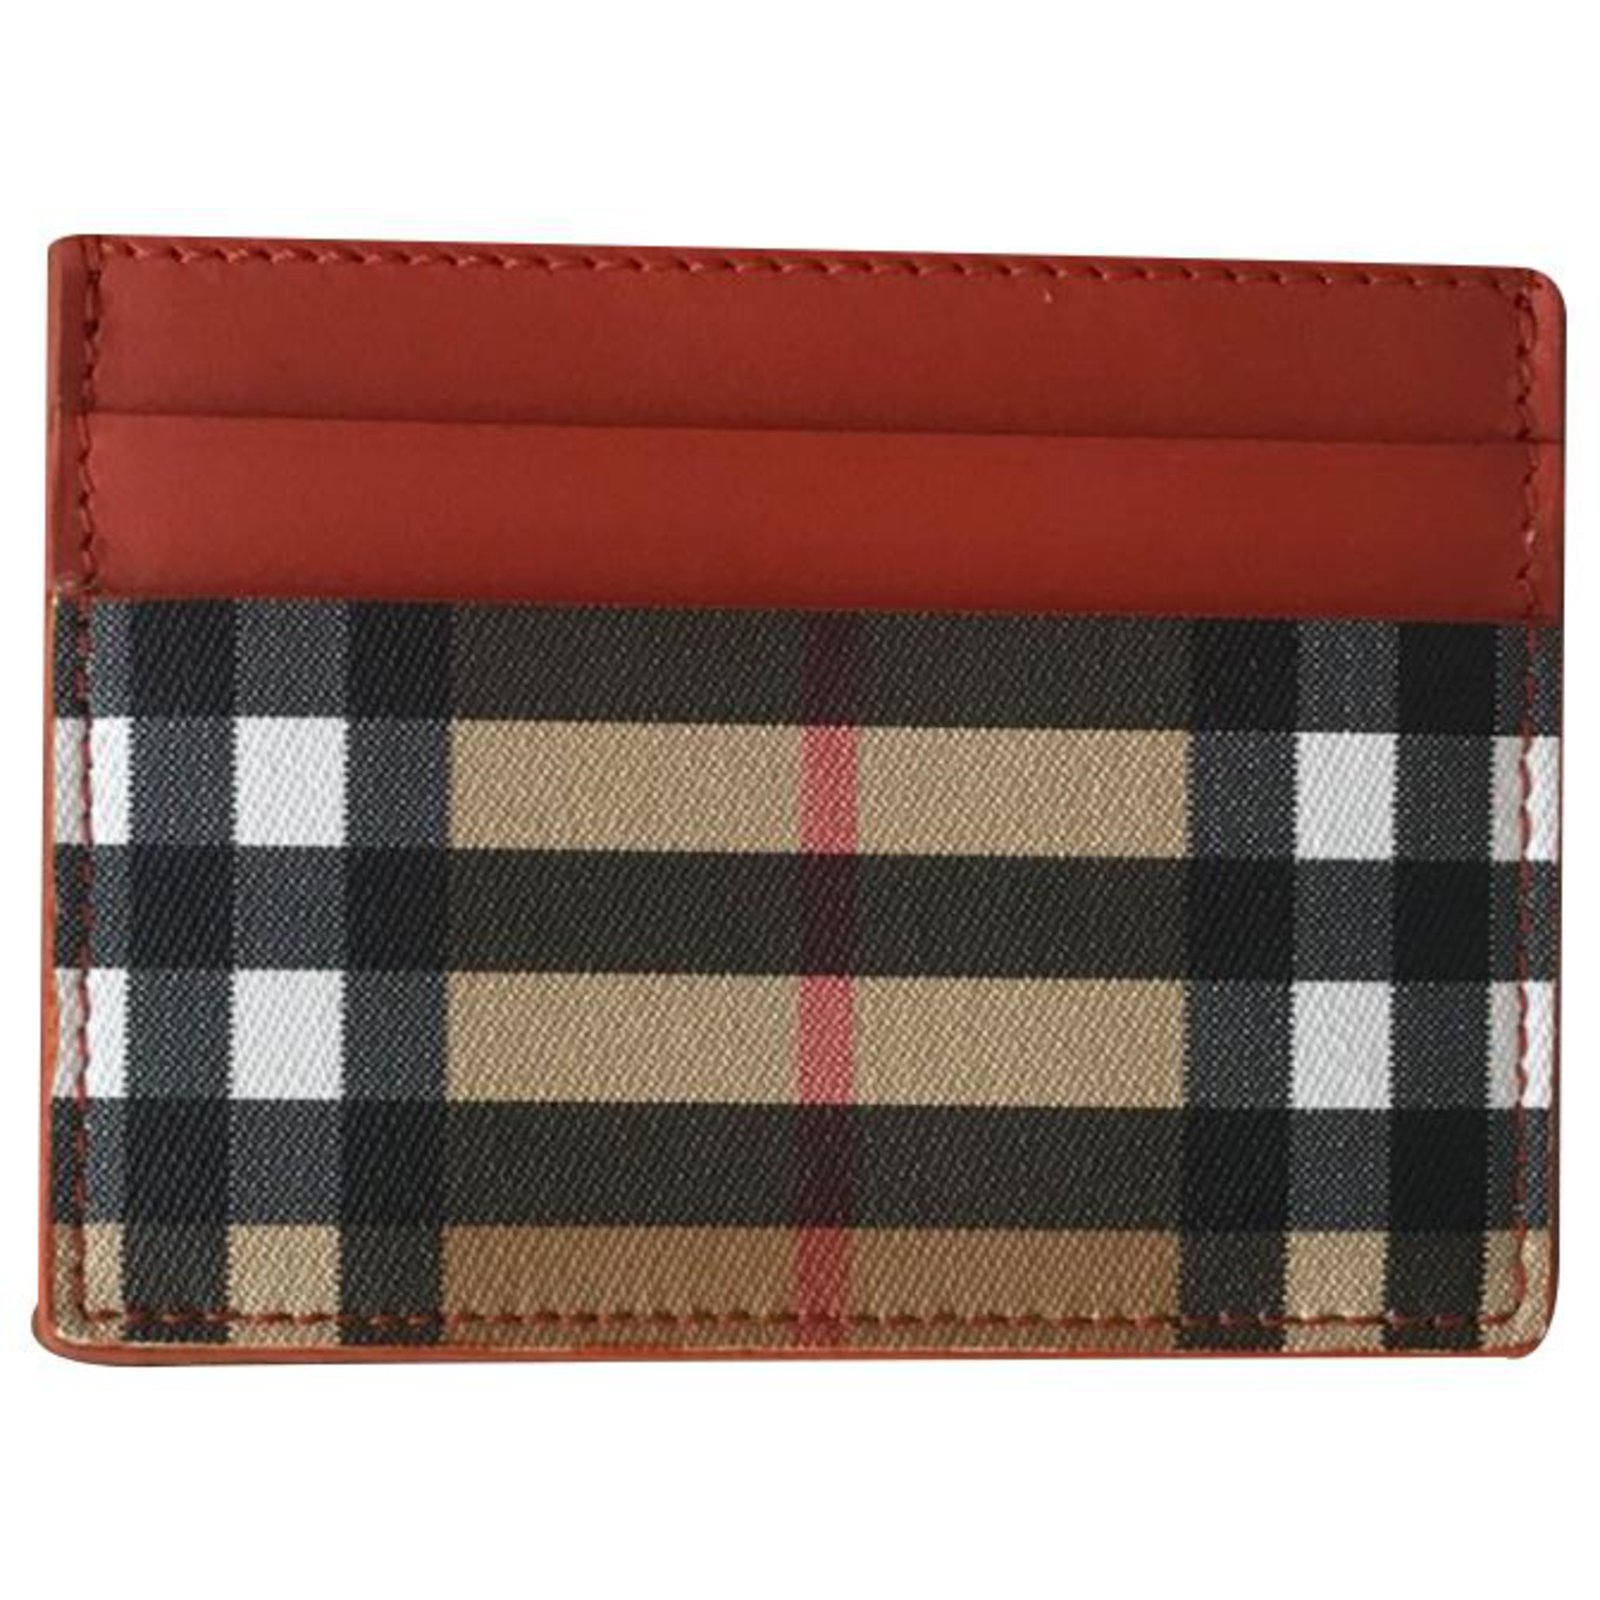 Burberry Red/Beige Leather Check Card Holder Multiple colors ref